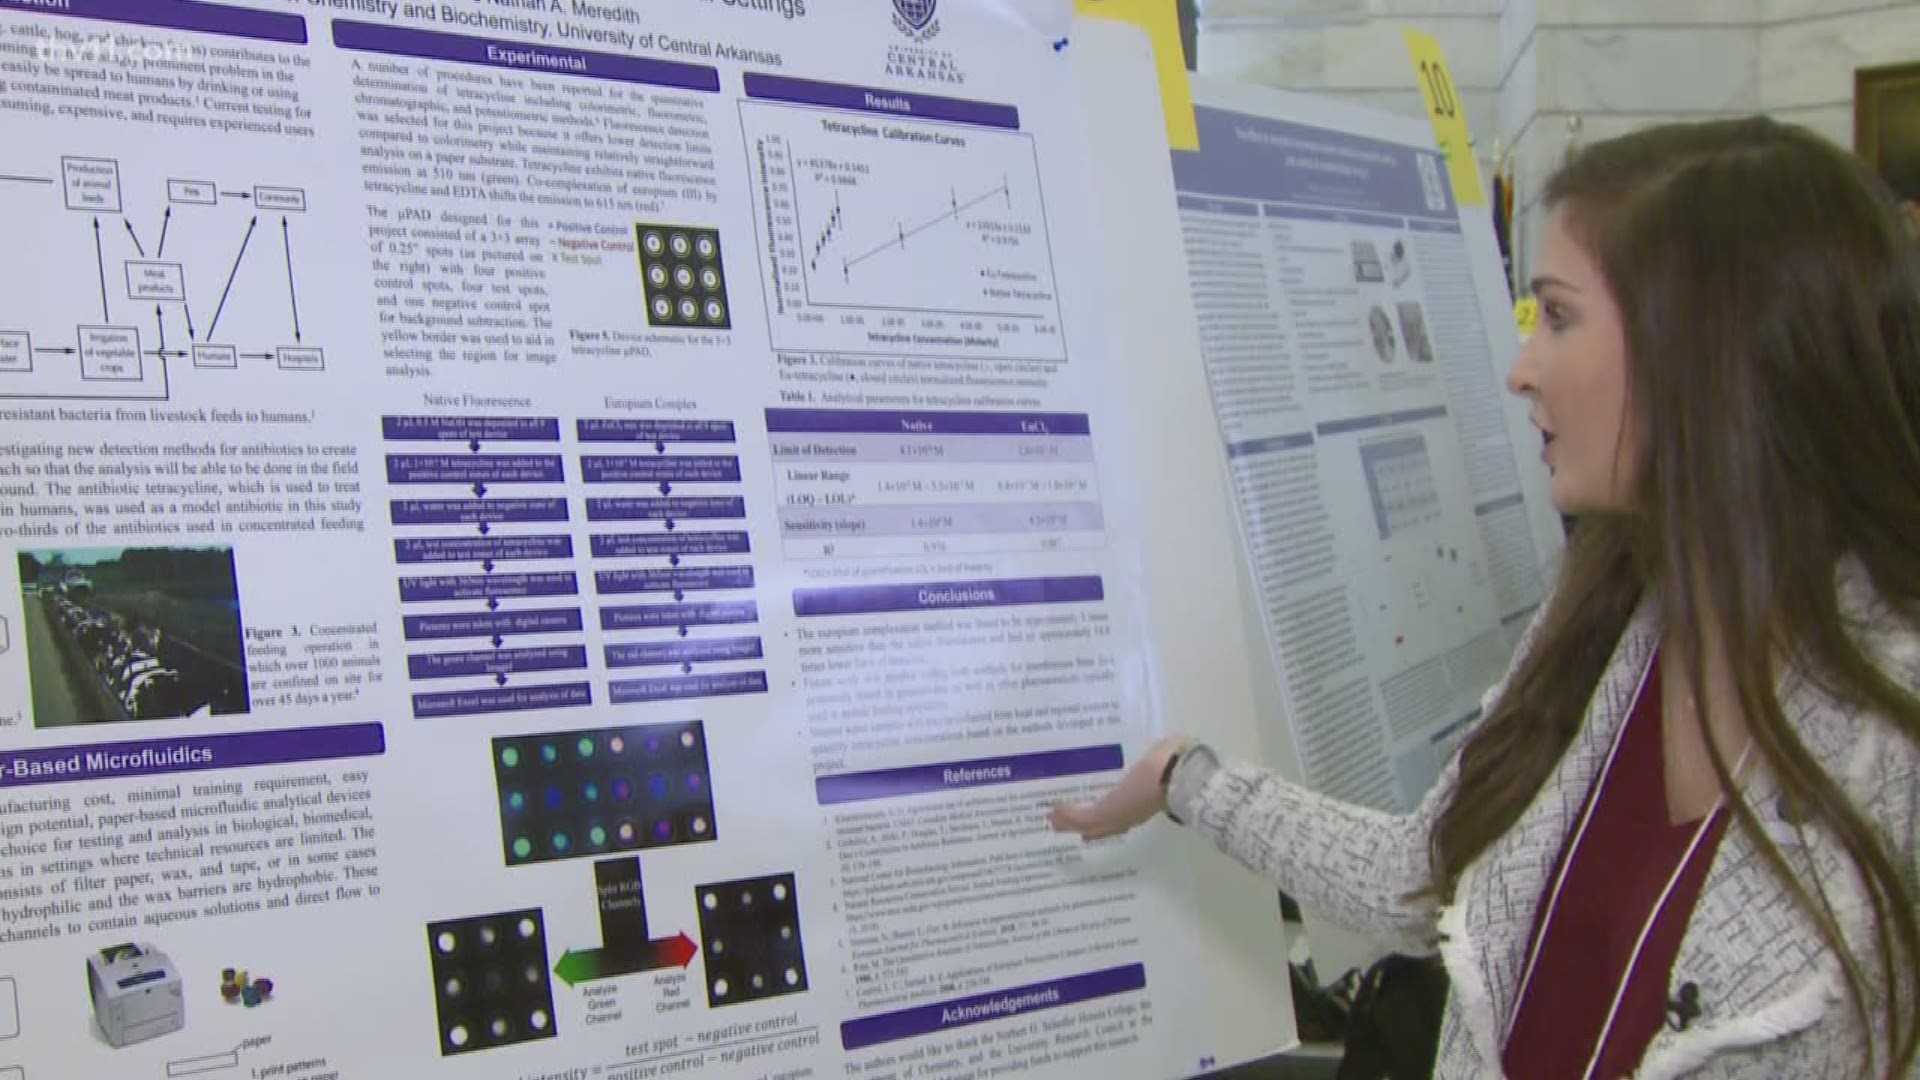 College students presented their research at the state capitol.